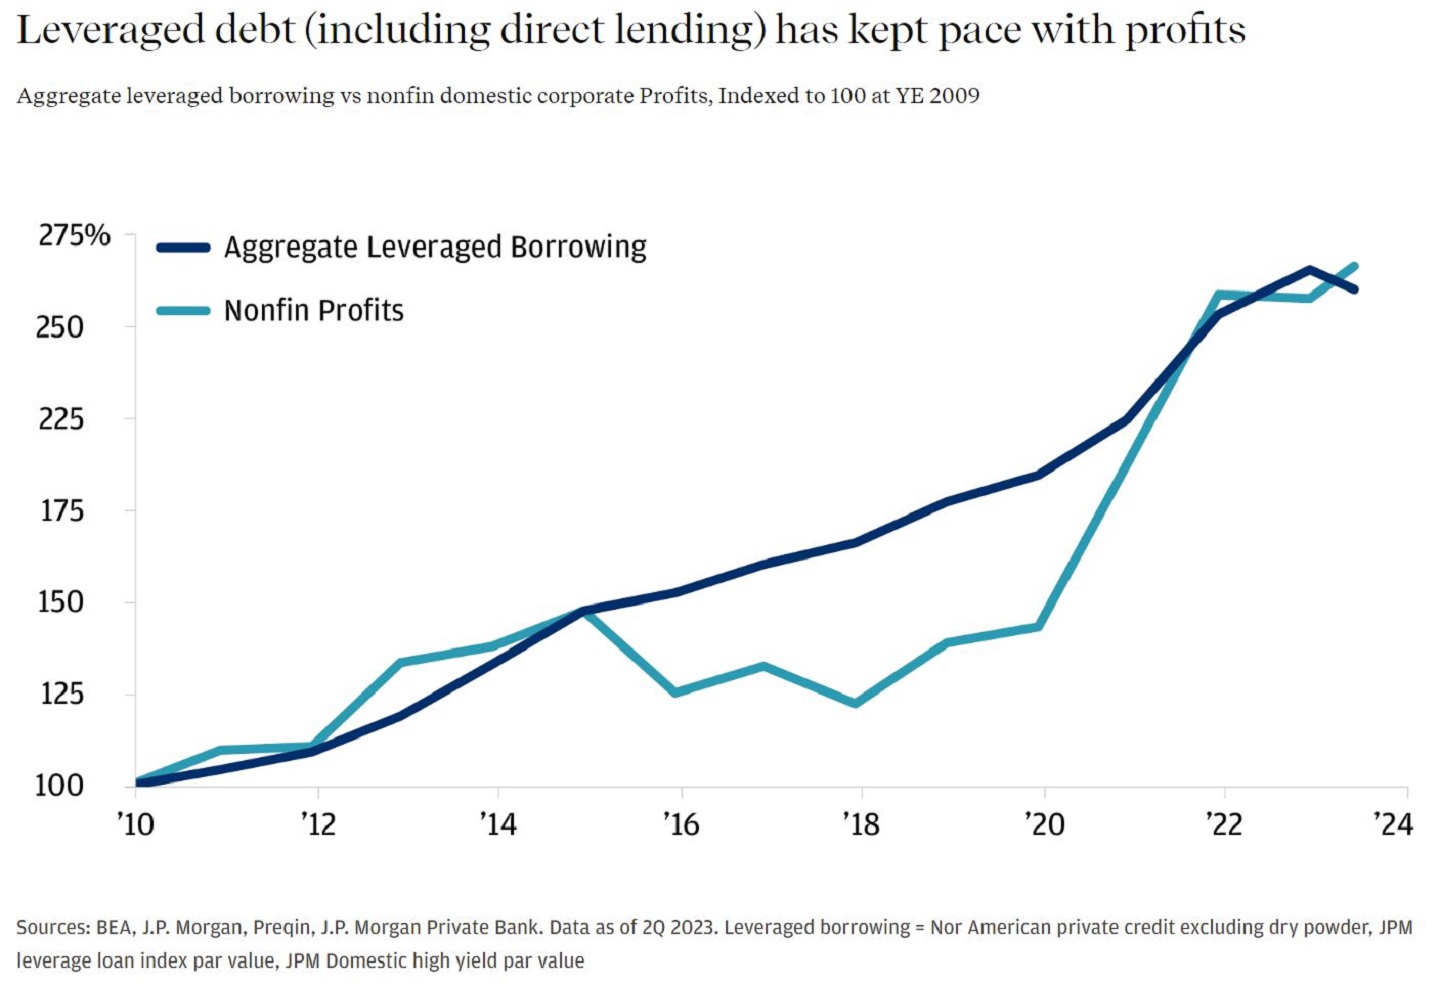 Line chart showing aggregate leveraged borrowing and nonfin domestic corporate profits.